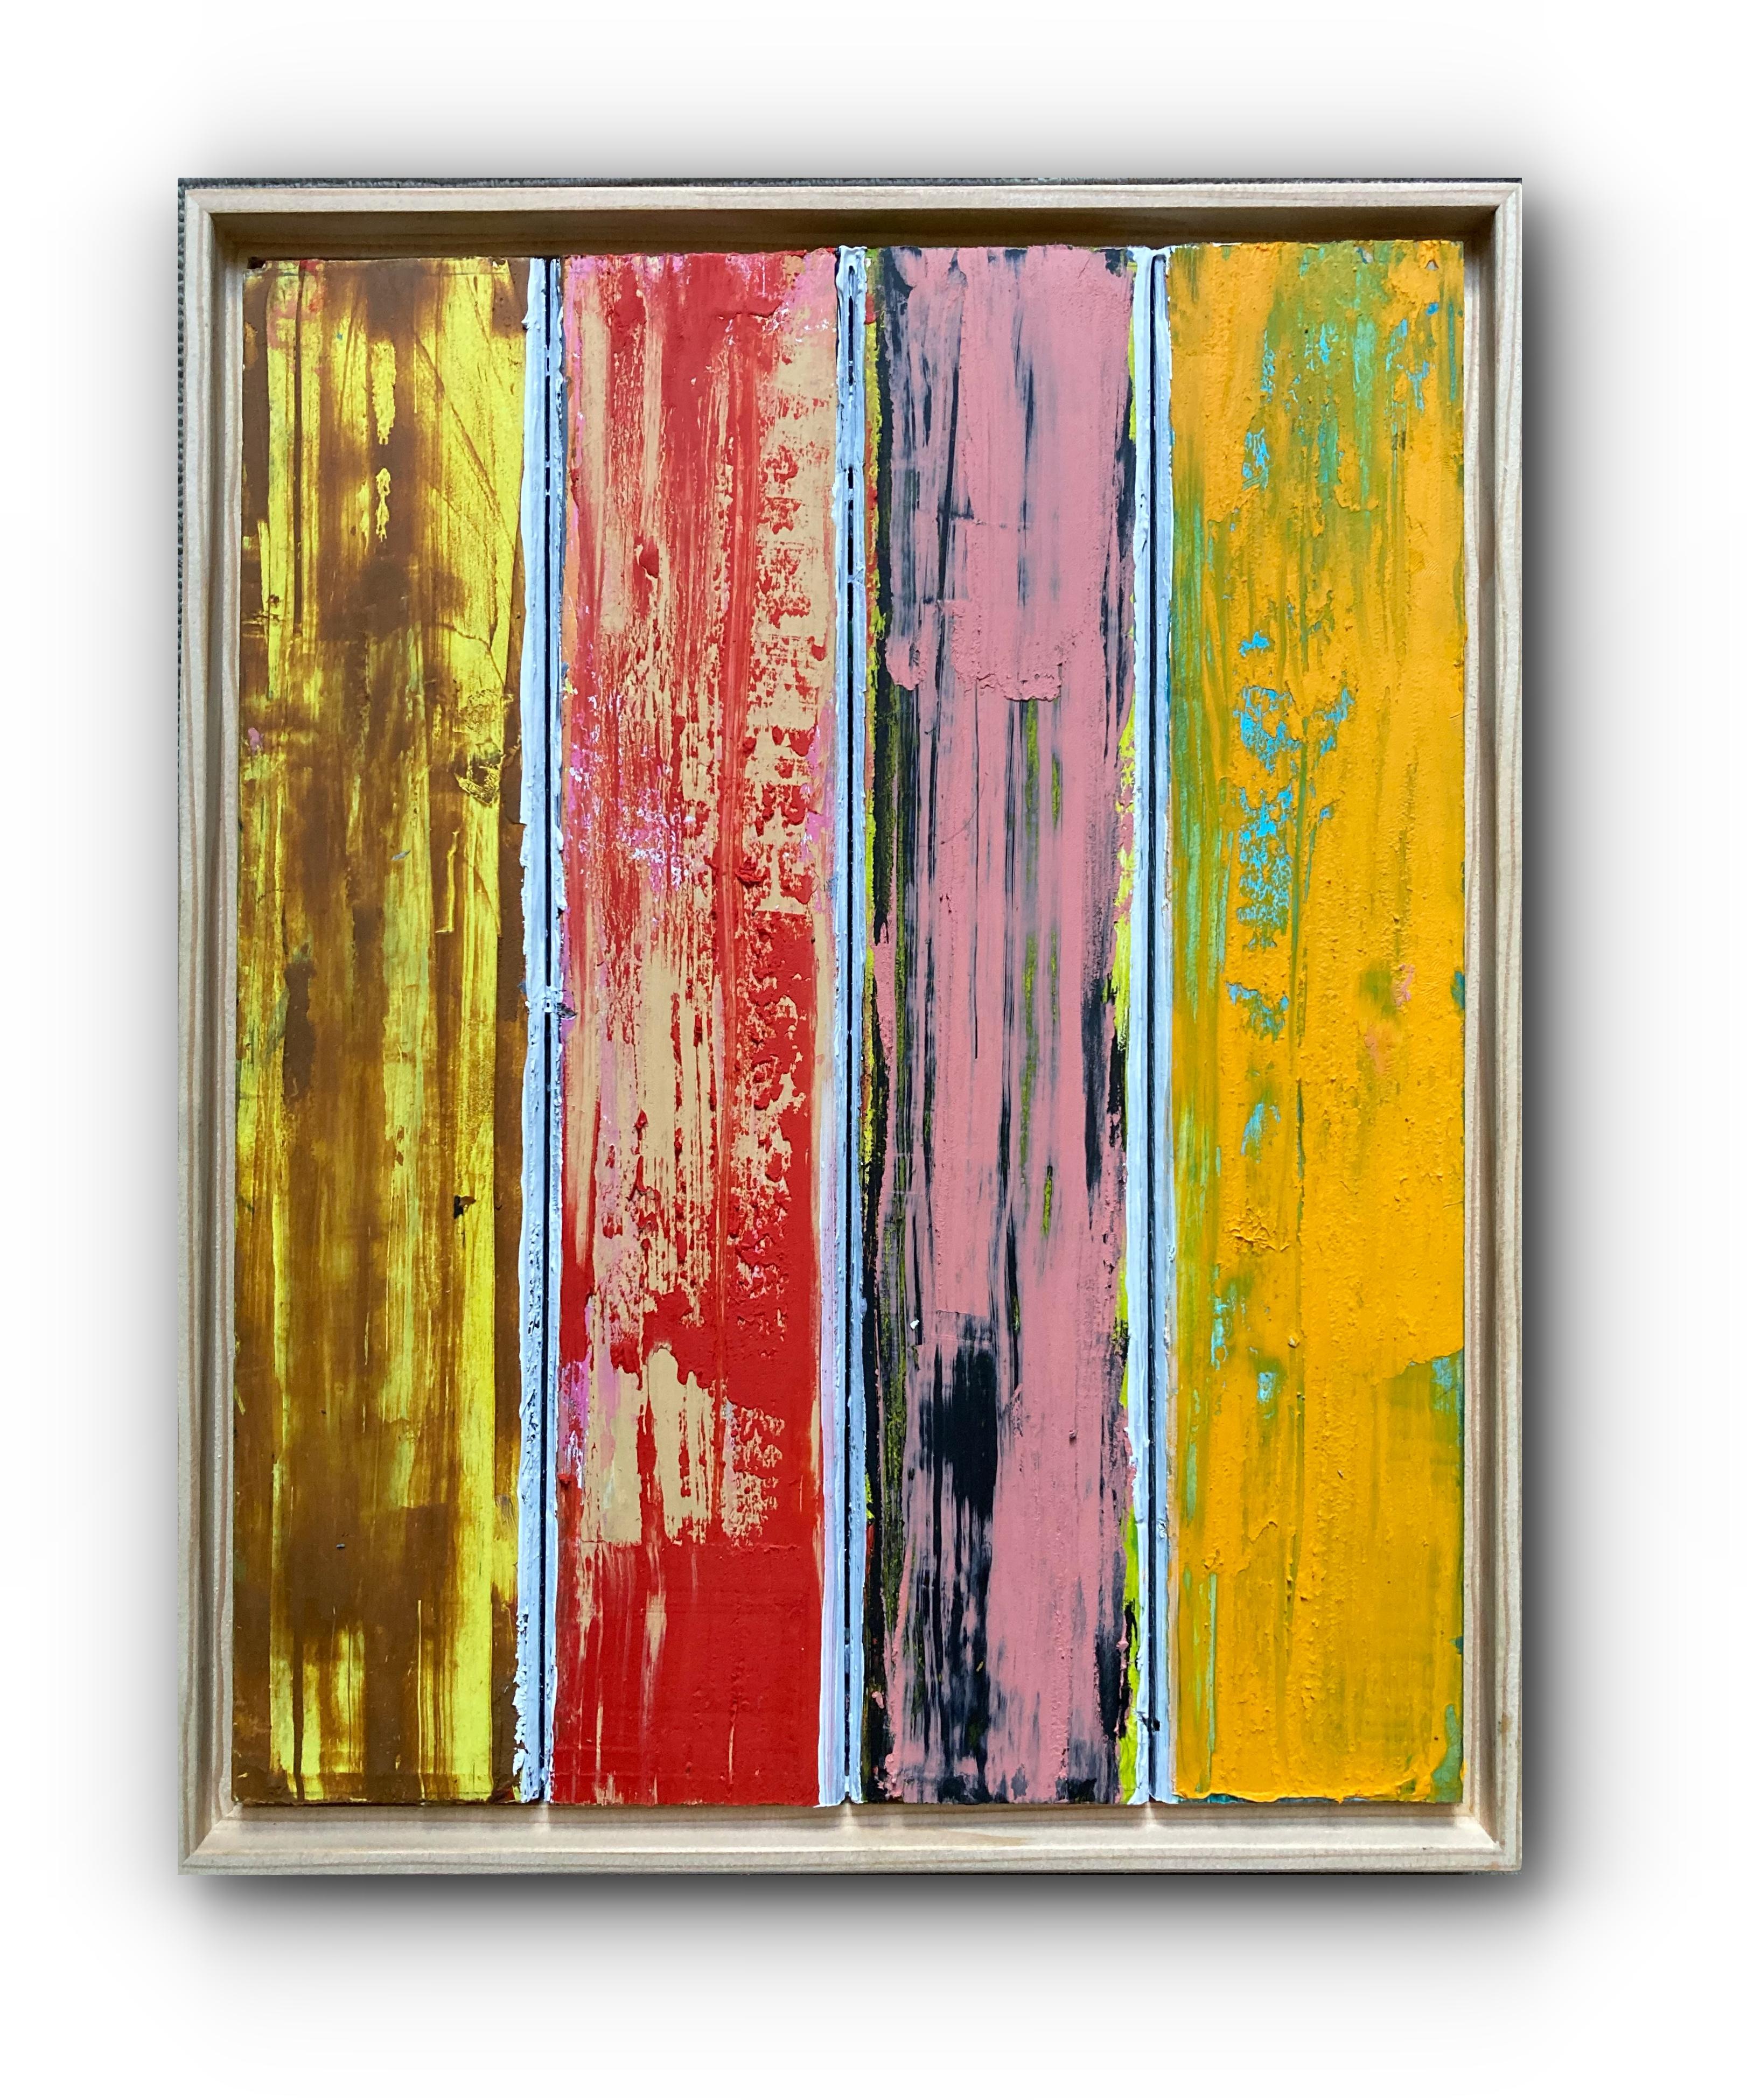 Carmen (Quadryptich Wood Panel Framed Contemporary Abstract Painting) 